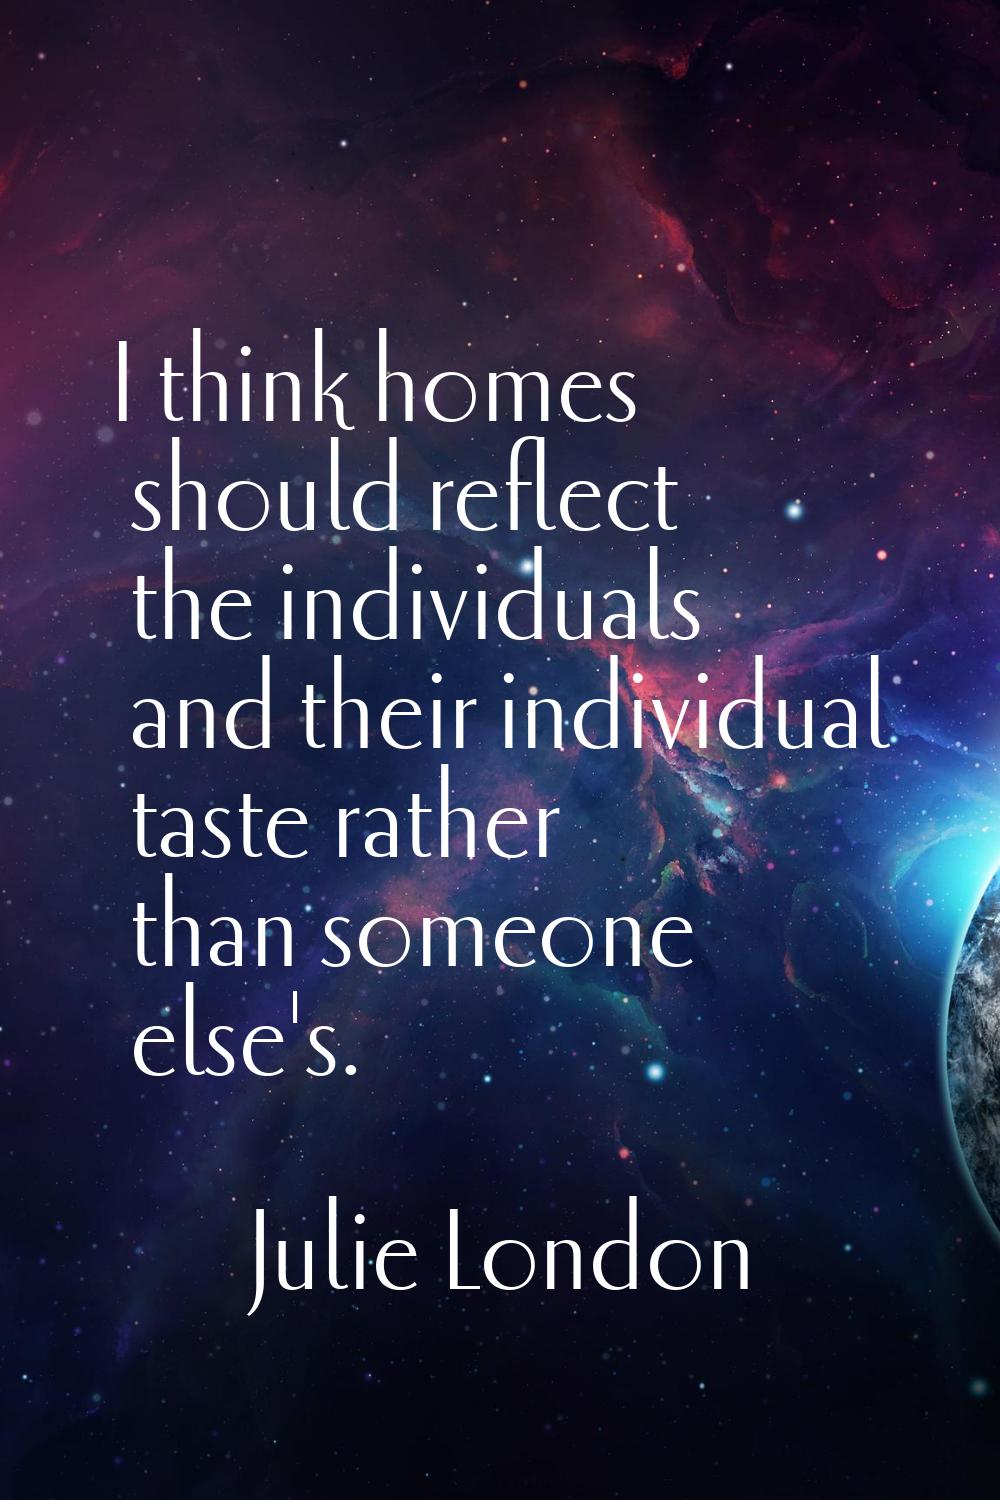 I think homes should reflect the individuals and their individual taste rather than someone else's.